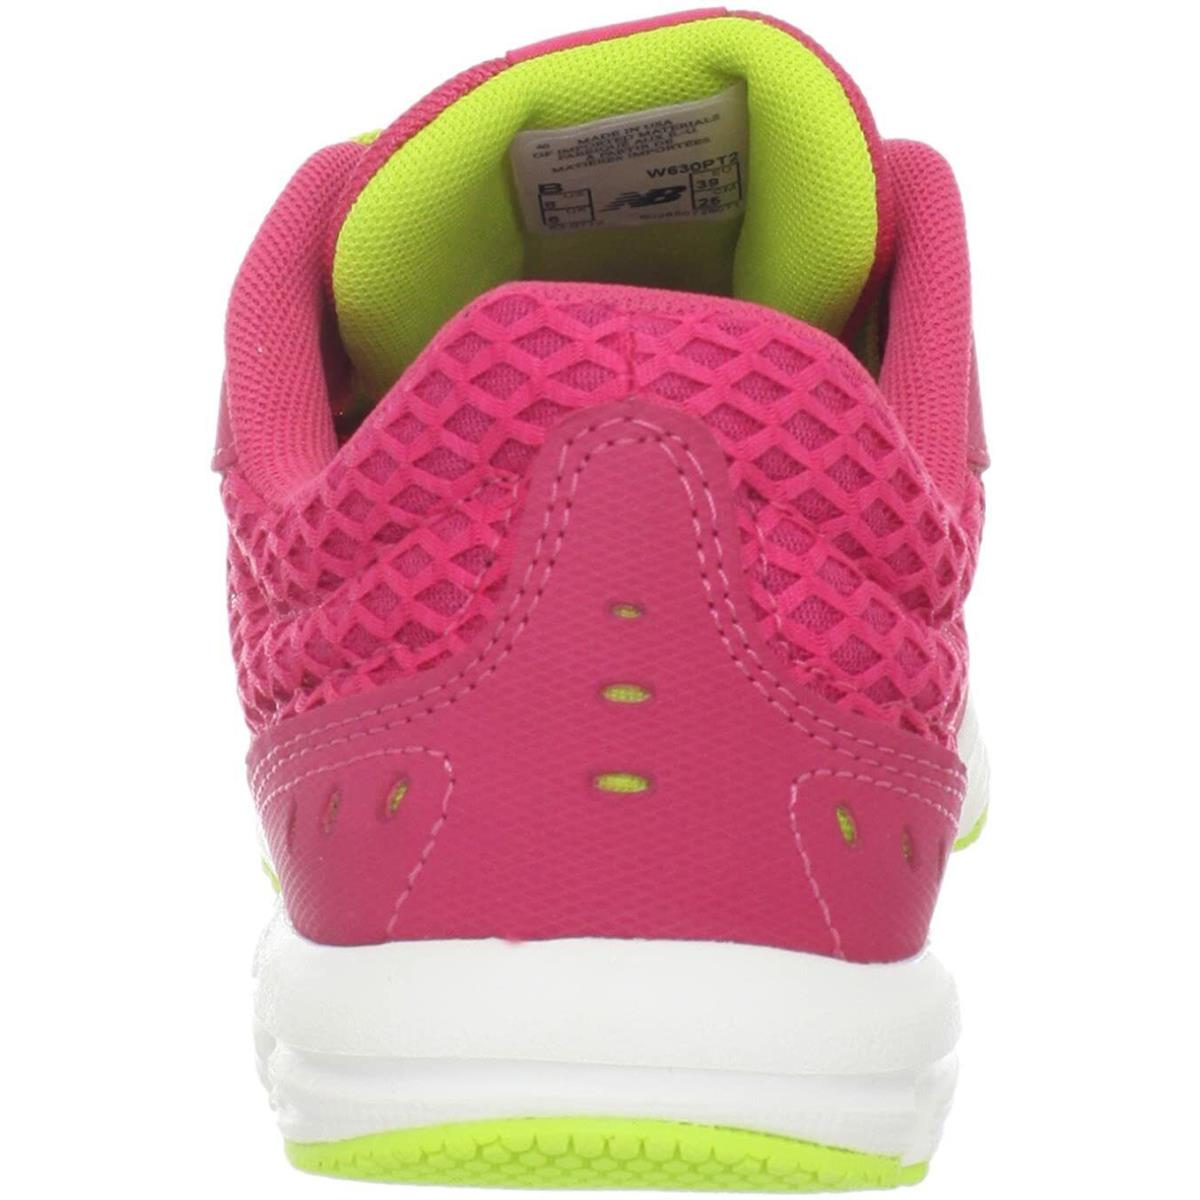 New Balance shoes  - Pink/Green 1